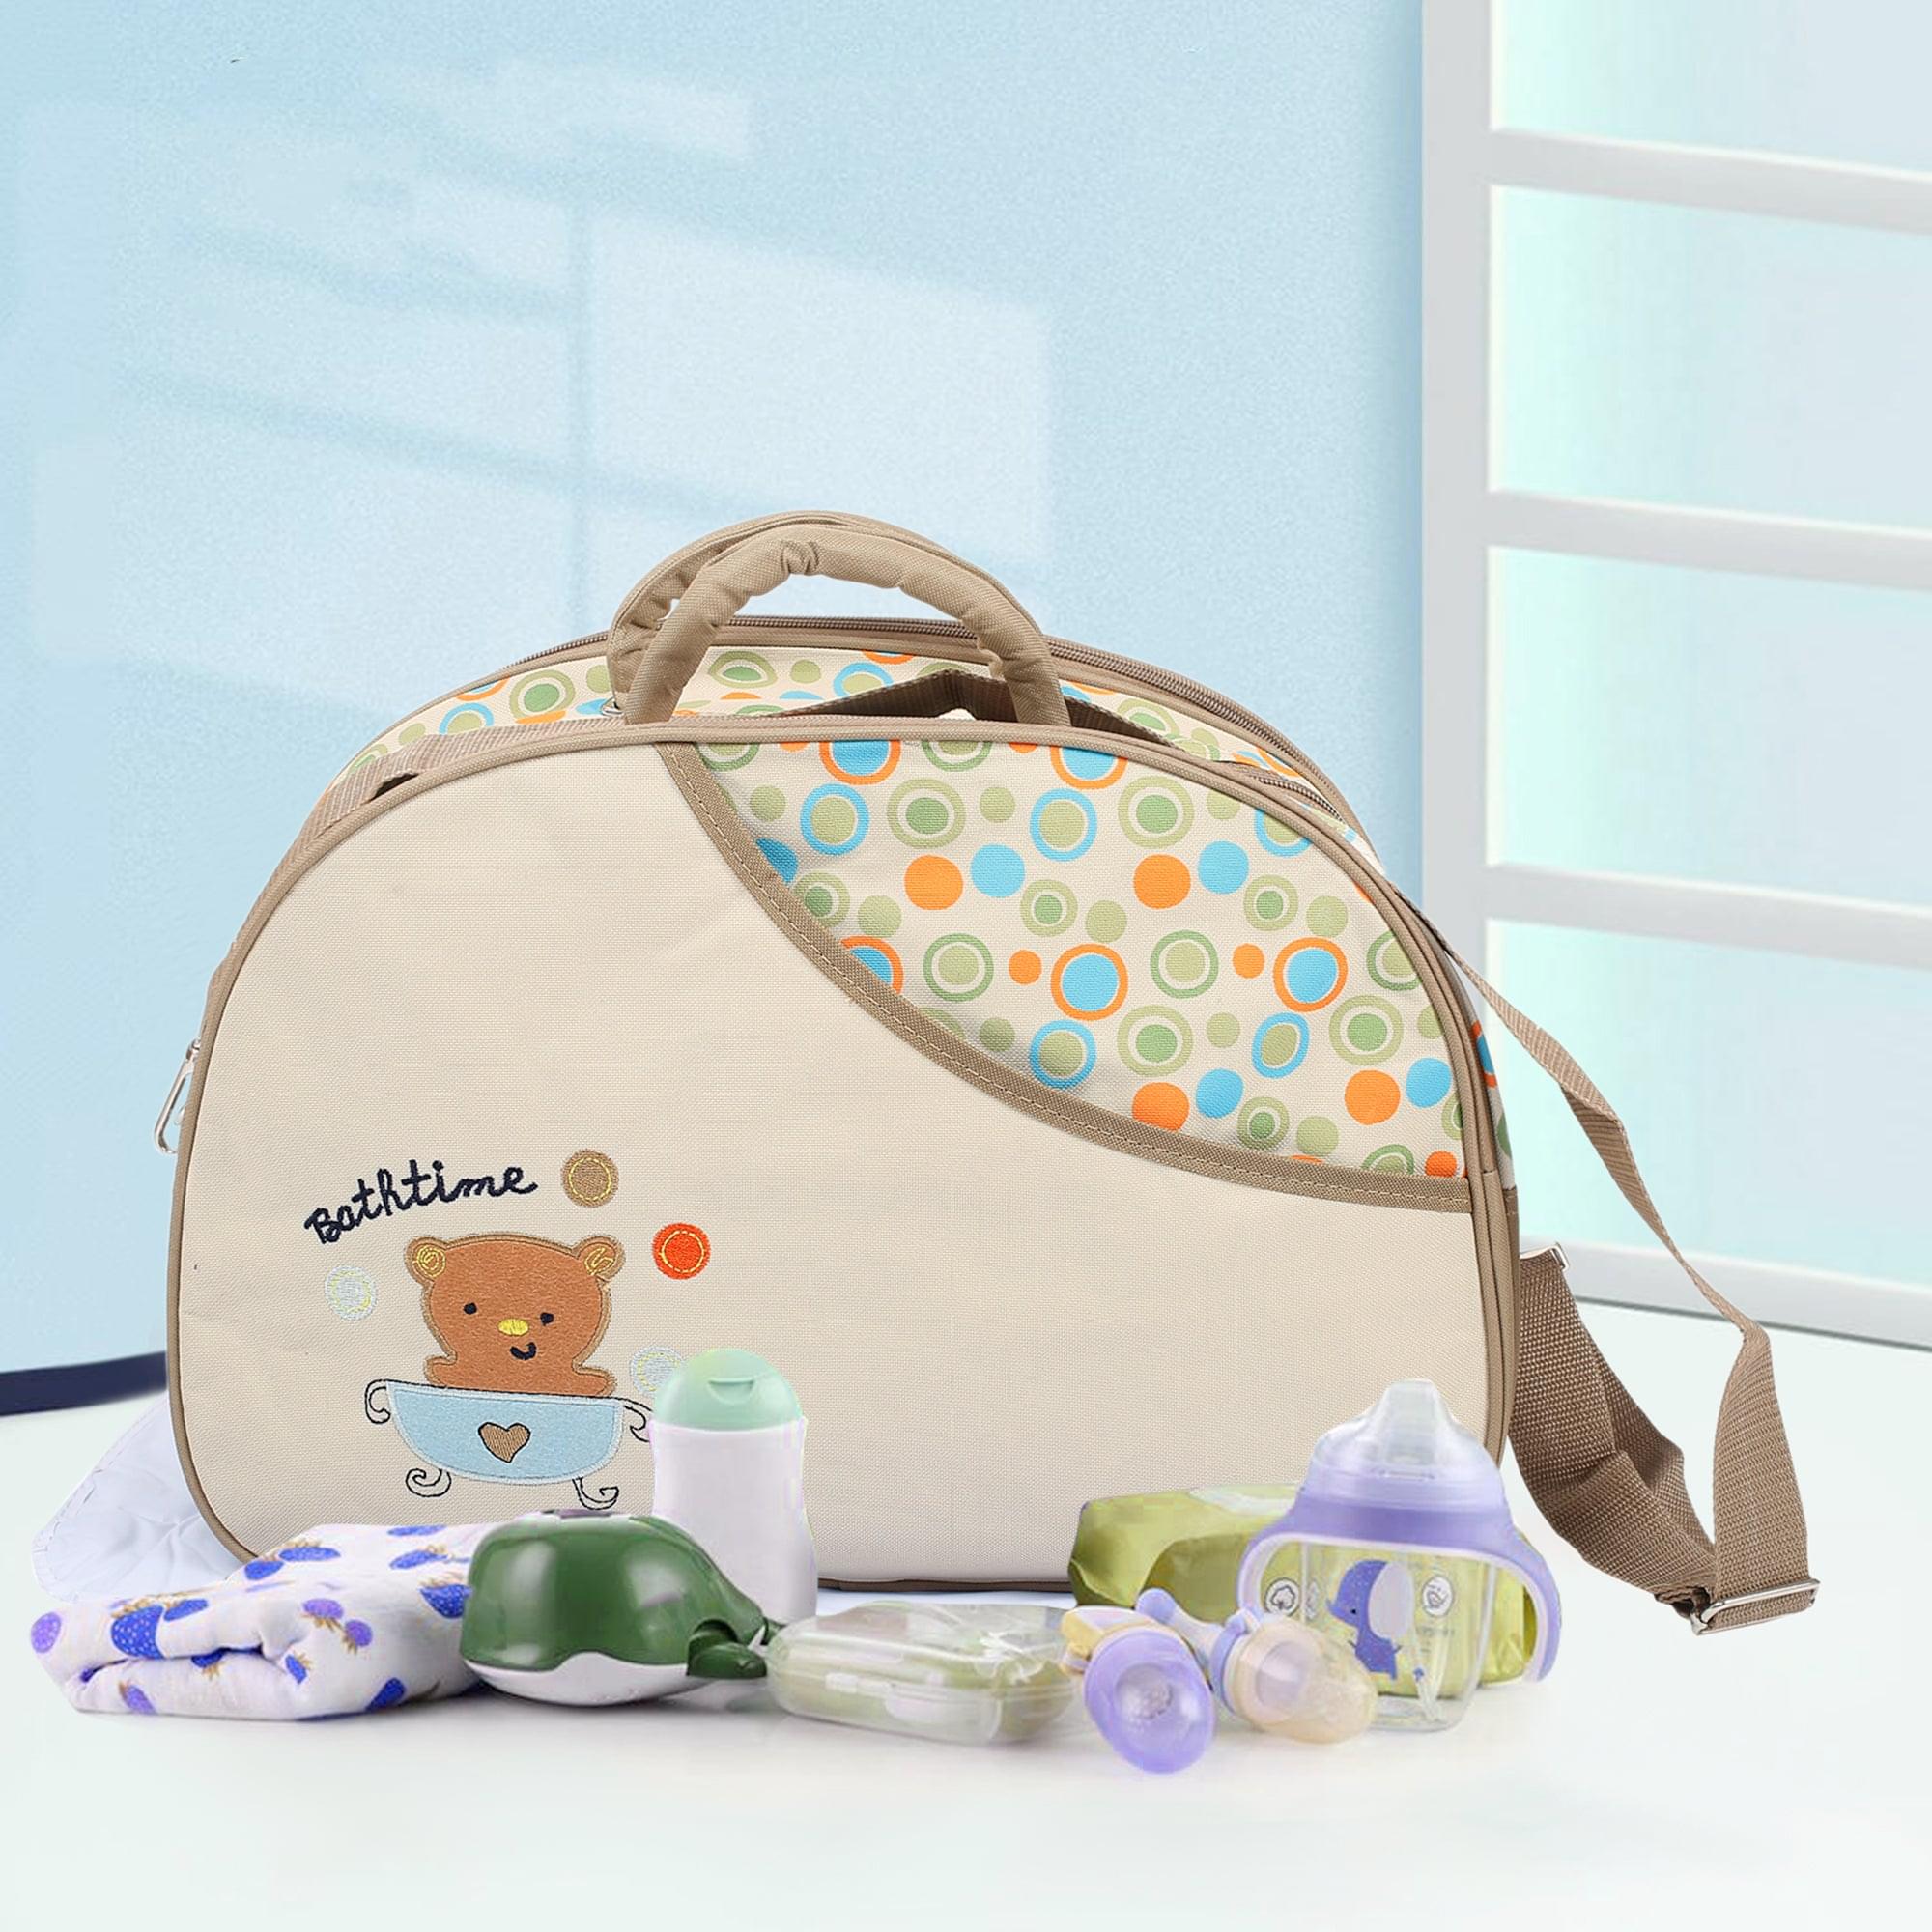 Diaper Bags - Buy Baby Diaper Bags | Baby Diaper Bags online at Best Prices  in India | Shopmotherly.com - MOTHERLY